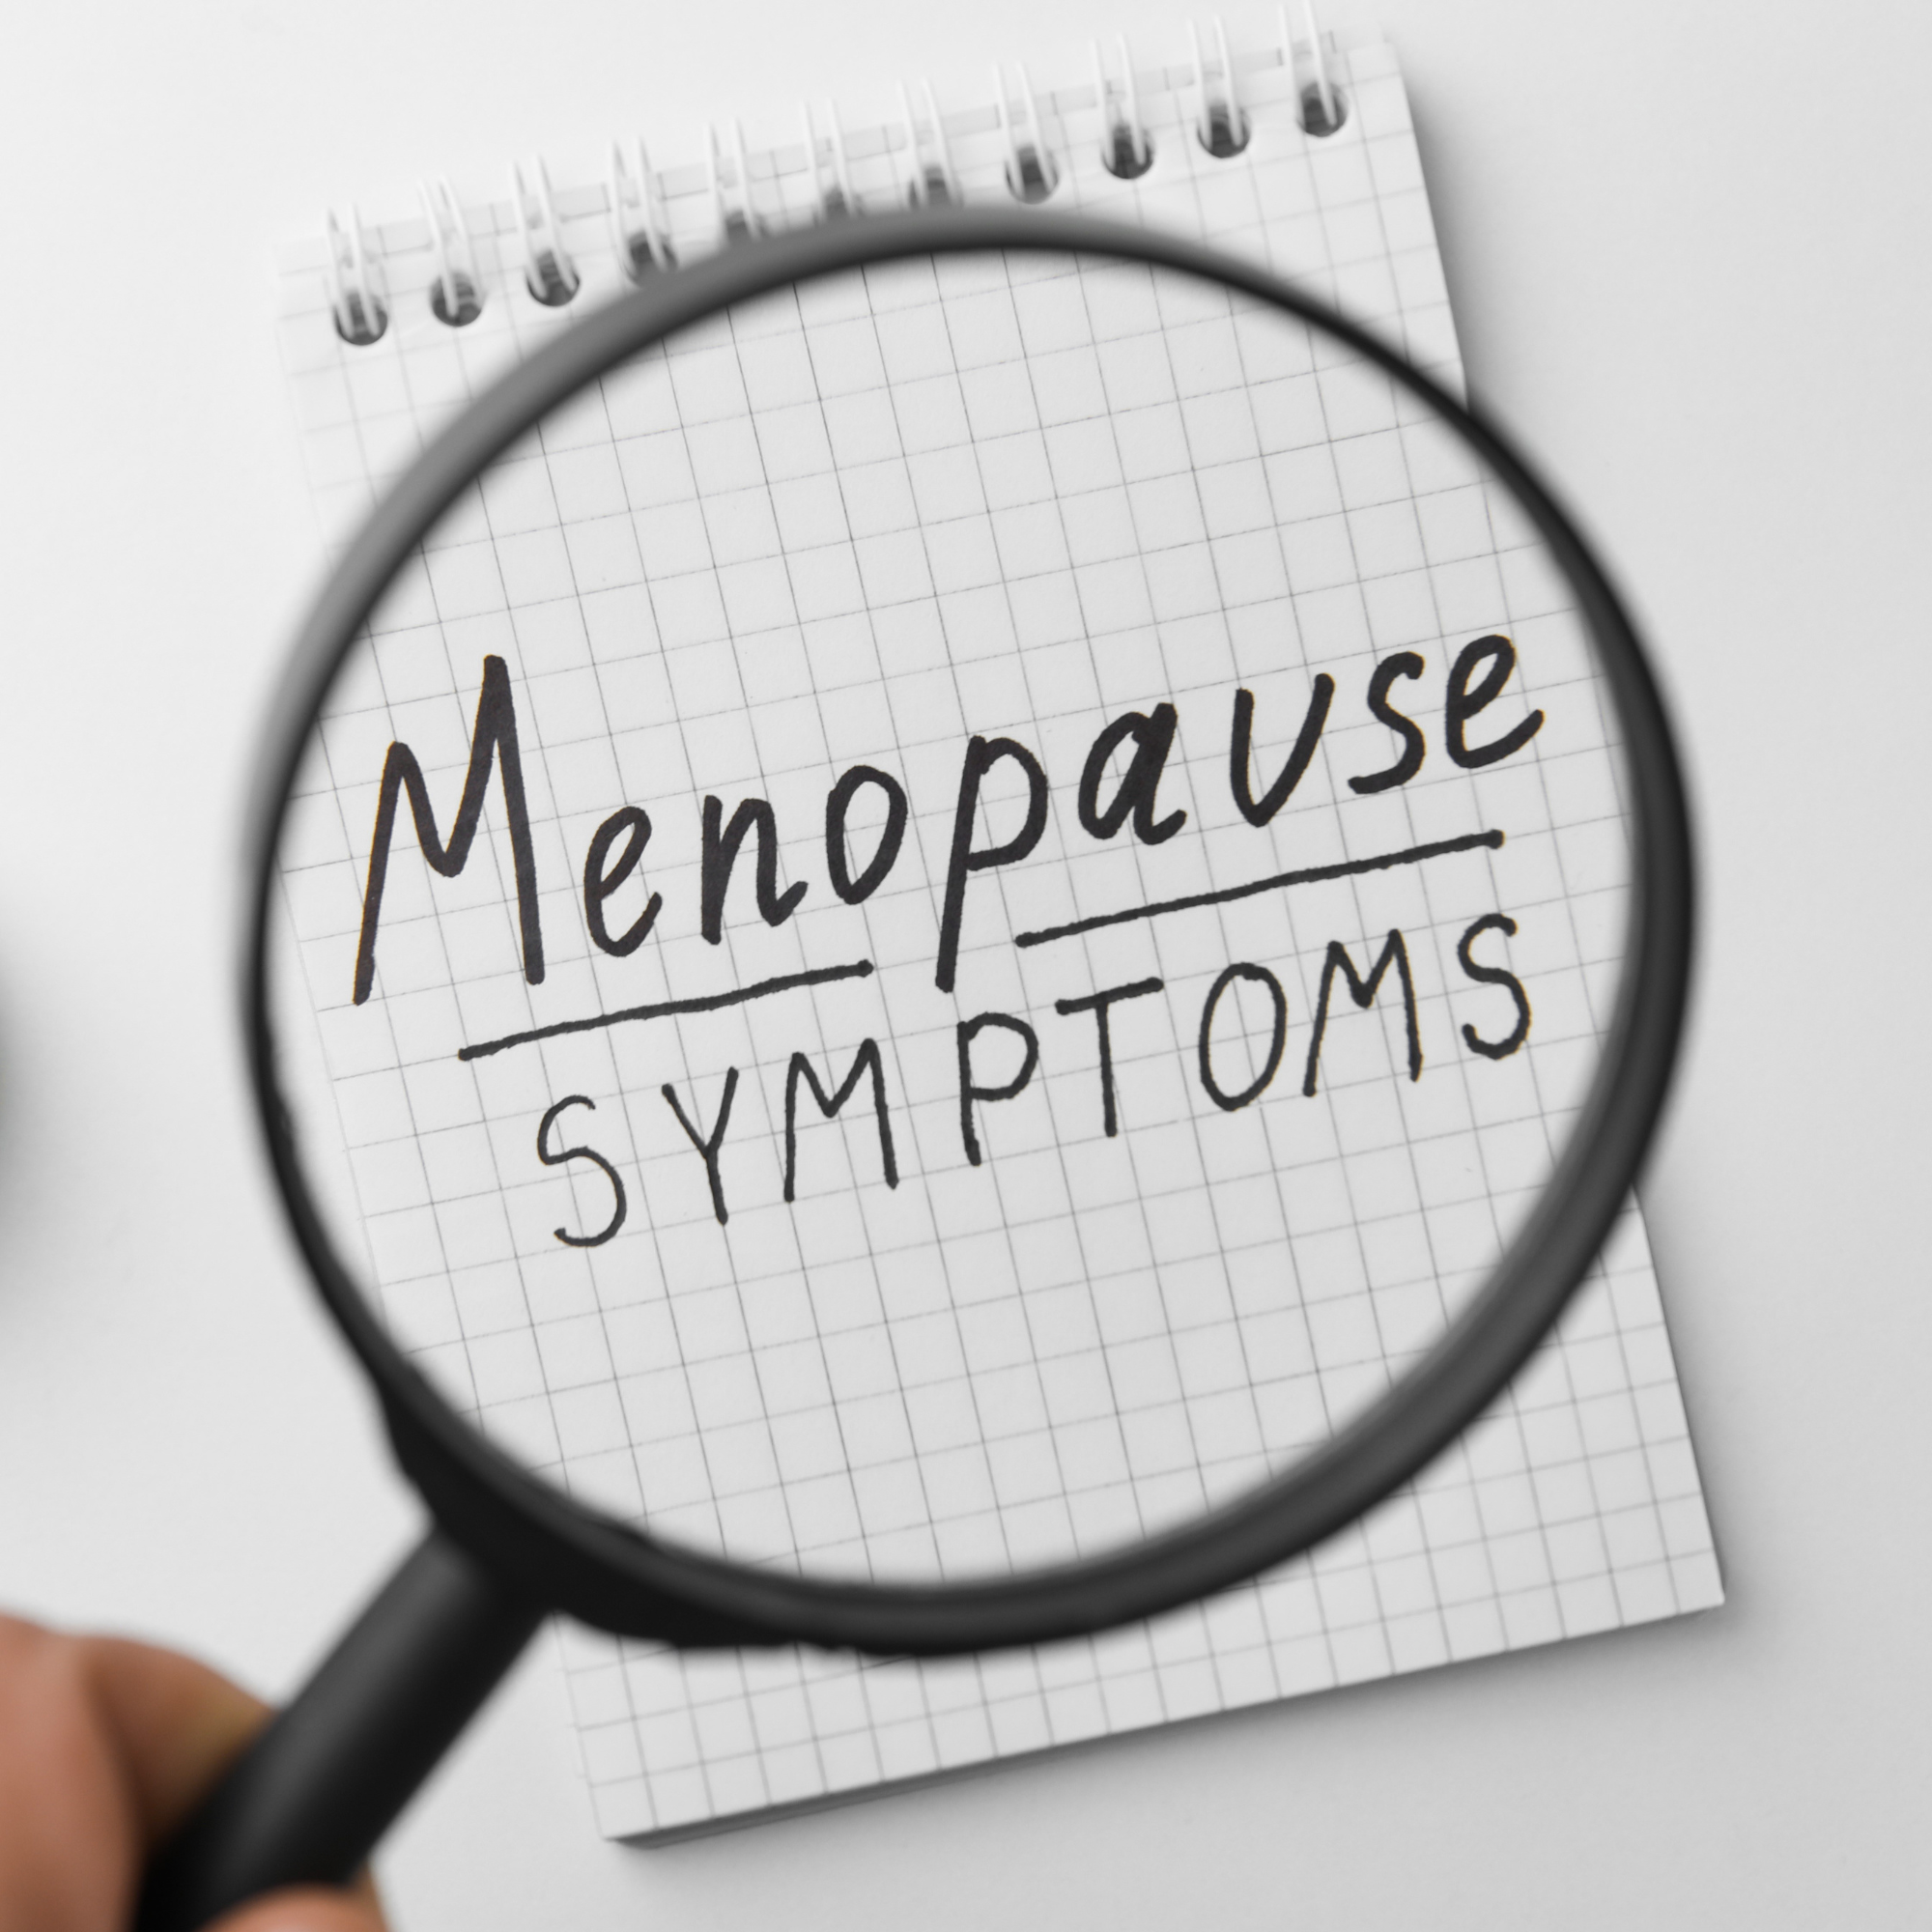 36 symptoms of menopause: The Complete List